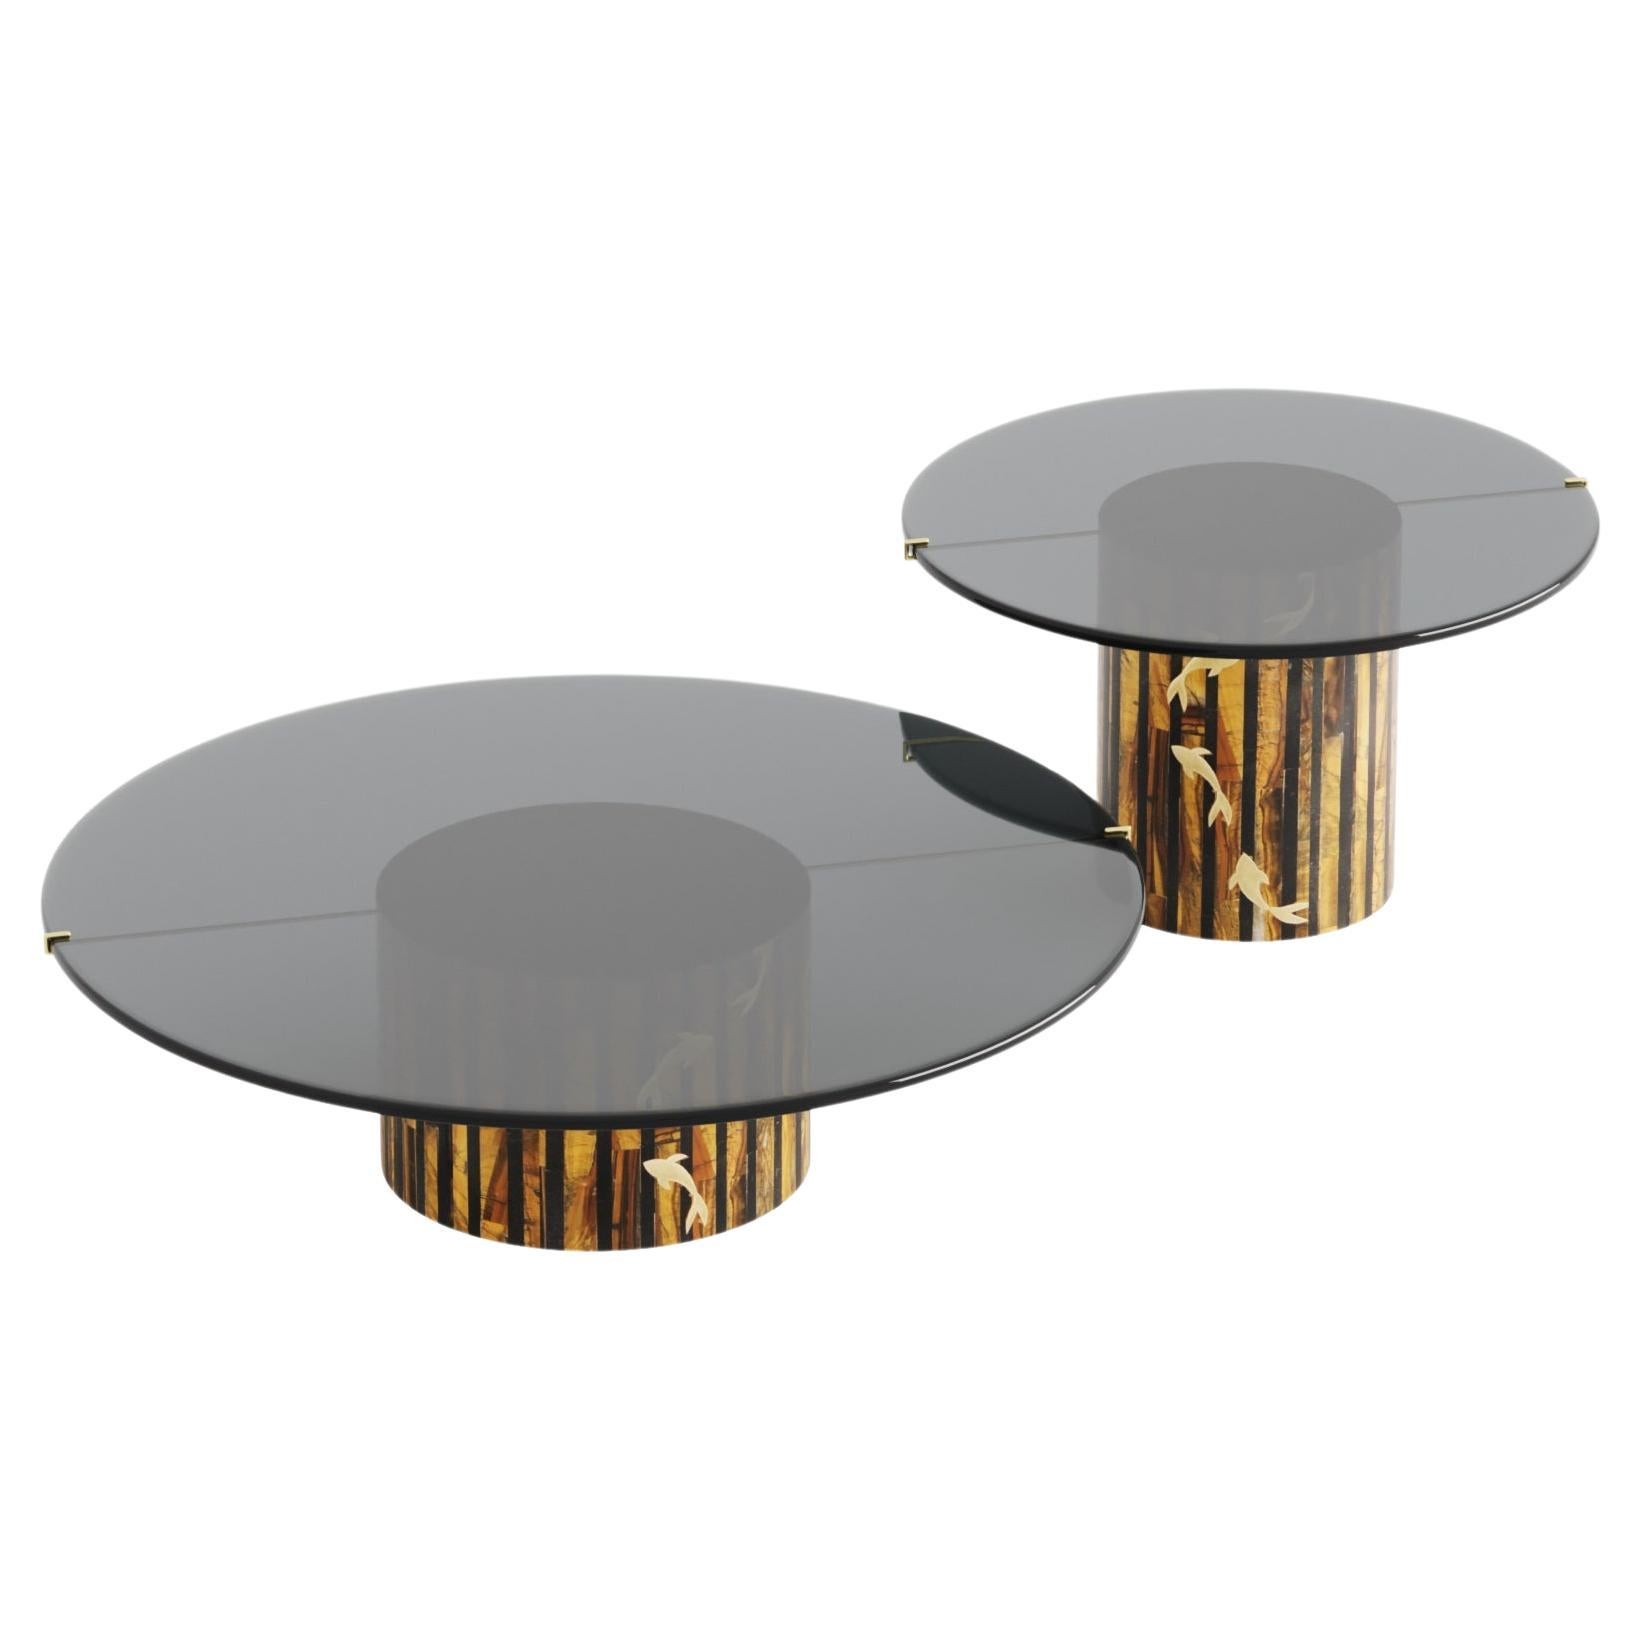 Coral Center Table Large In Tiger Eye Stone With Brass Inlay Accent 